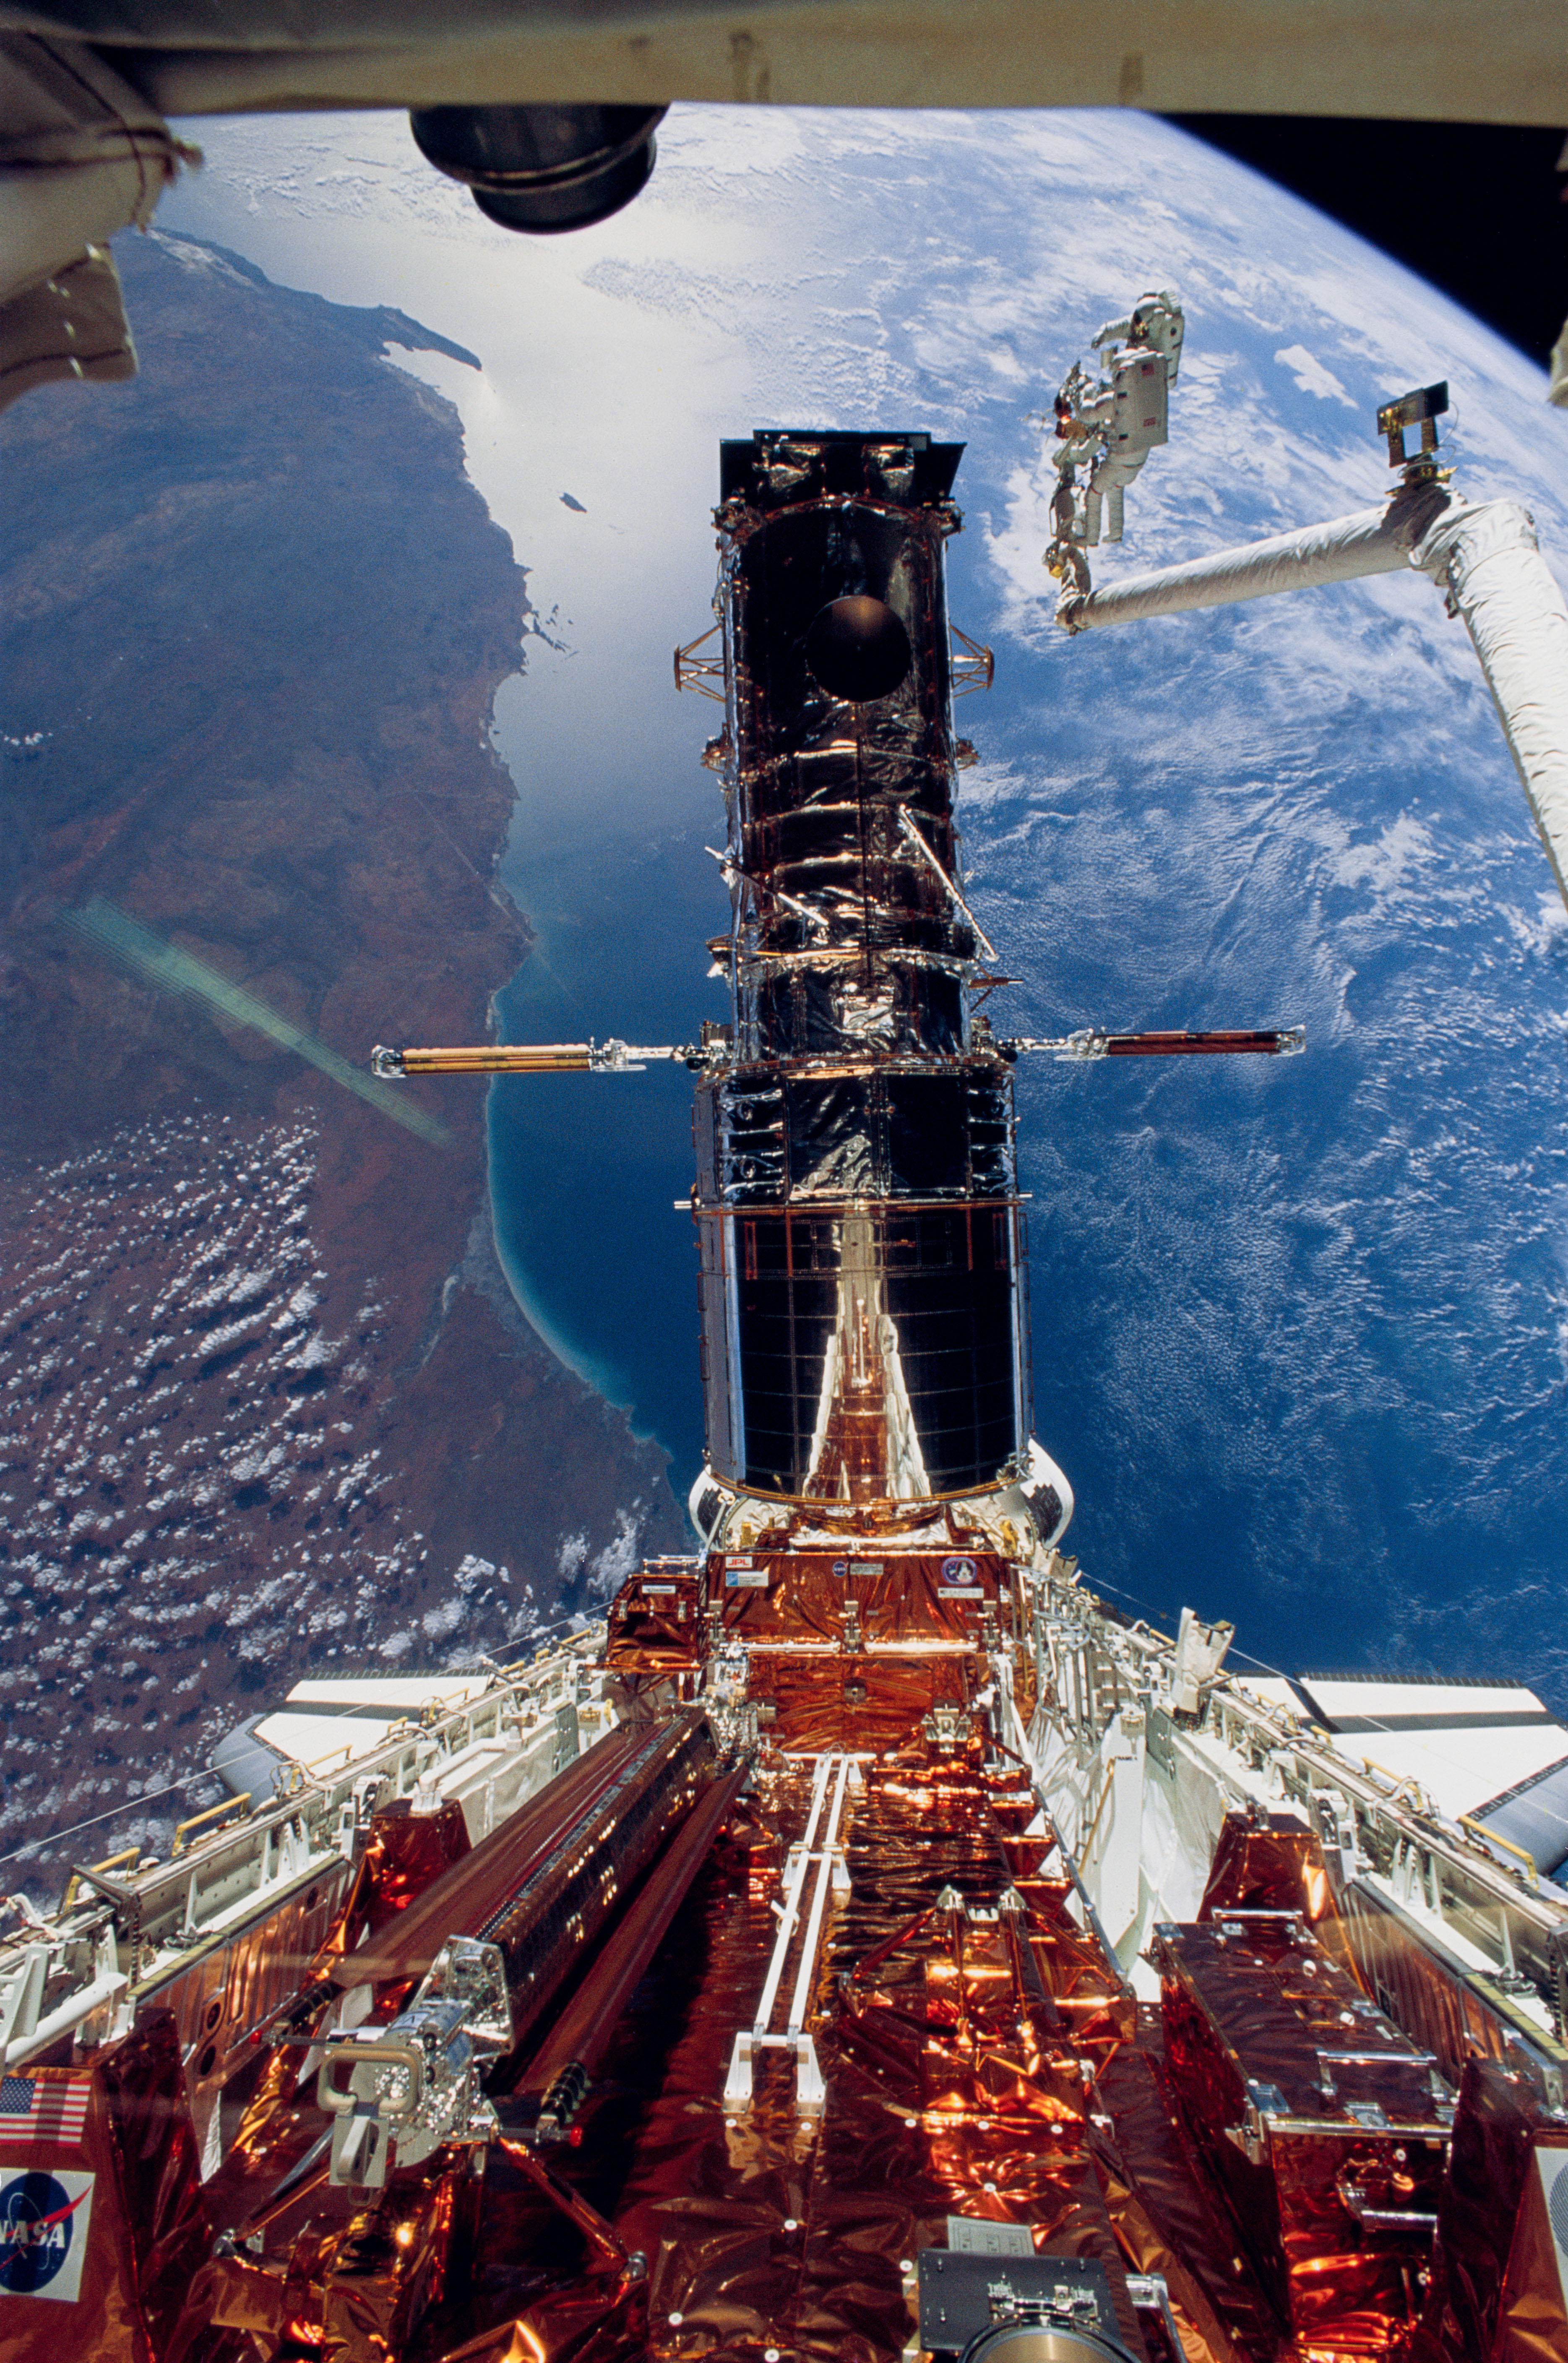 Two astronauts on the end of the shuttle's robotic arm are raised to the top of Hubble. A full Hubble, and the gold cargo bay carriers are seen in front of earth.